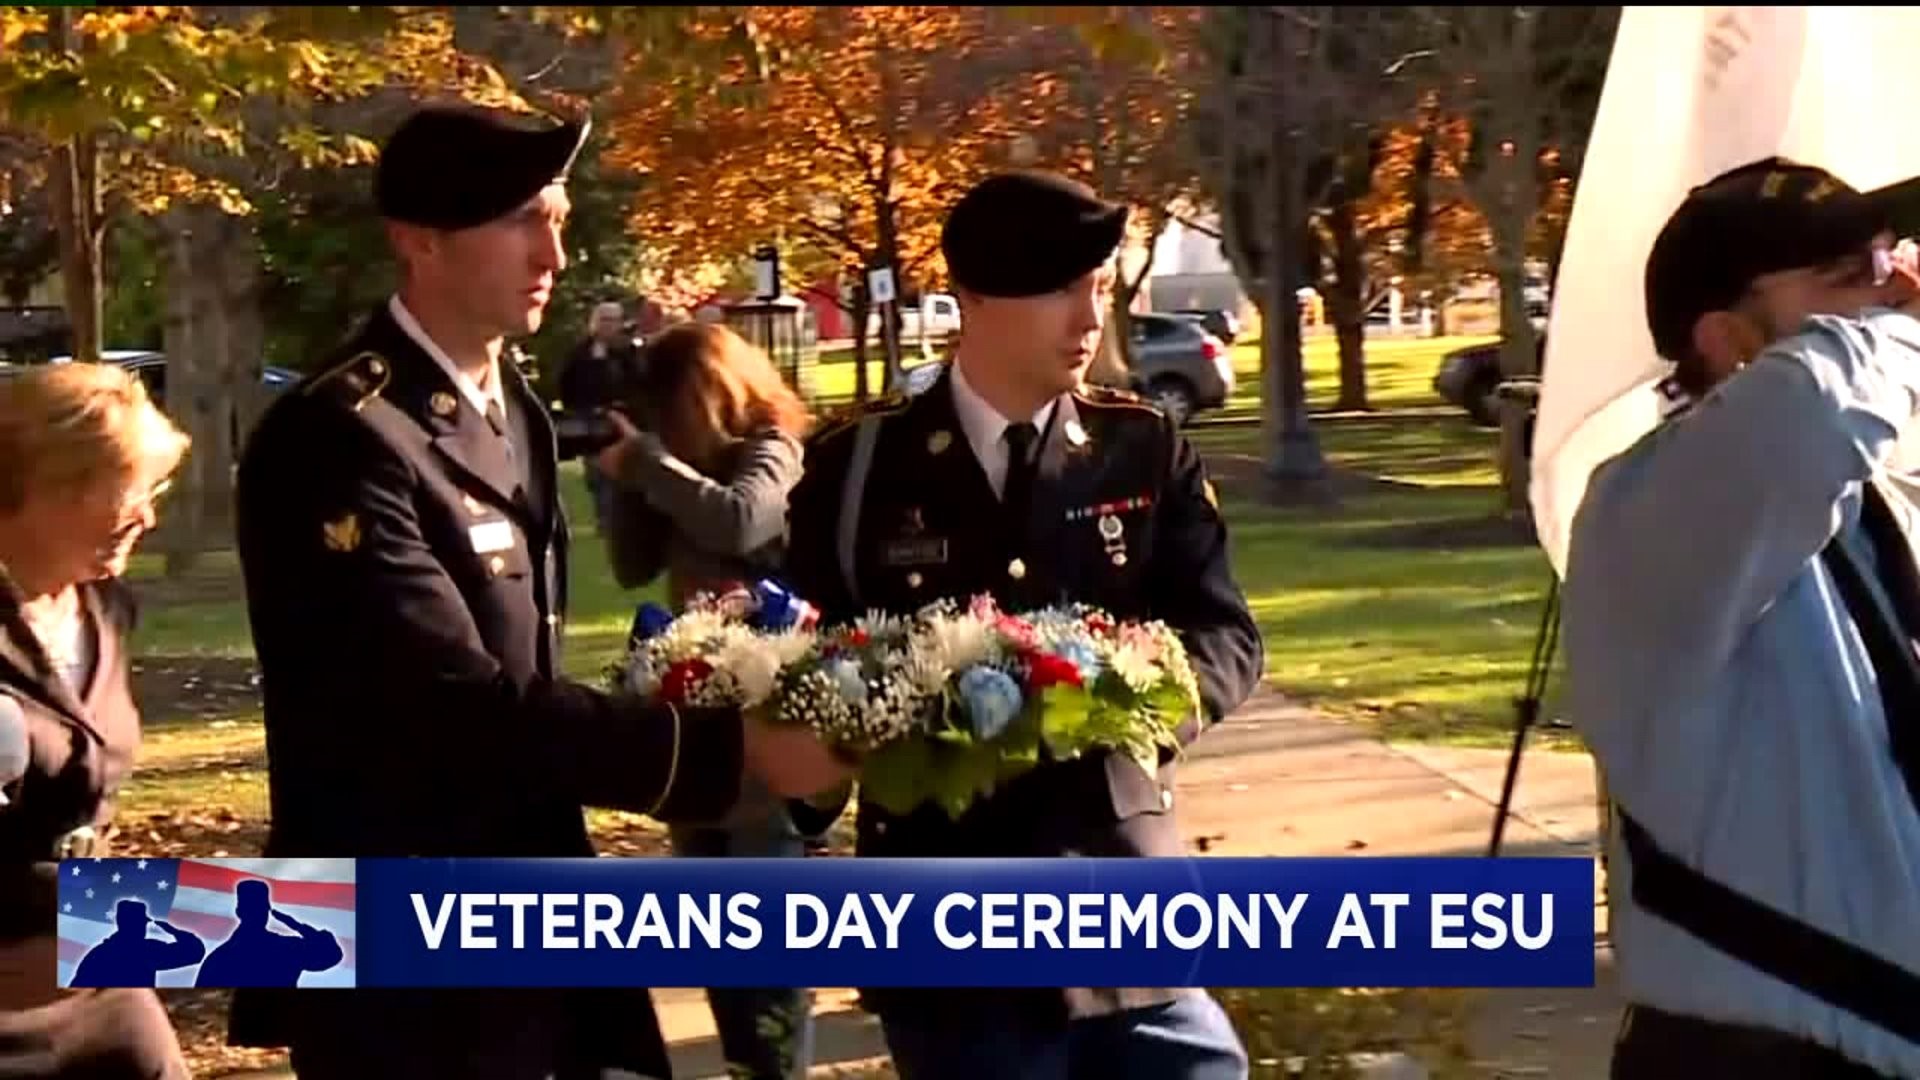 Wreaths Laid for Veterans Day in Monroe County